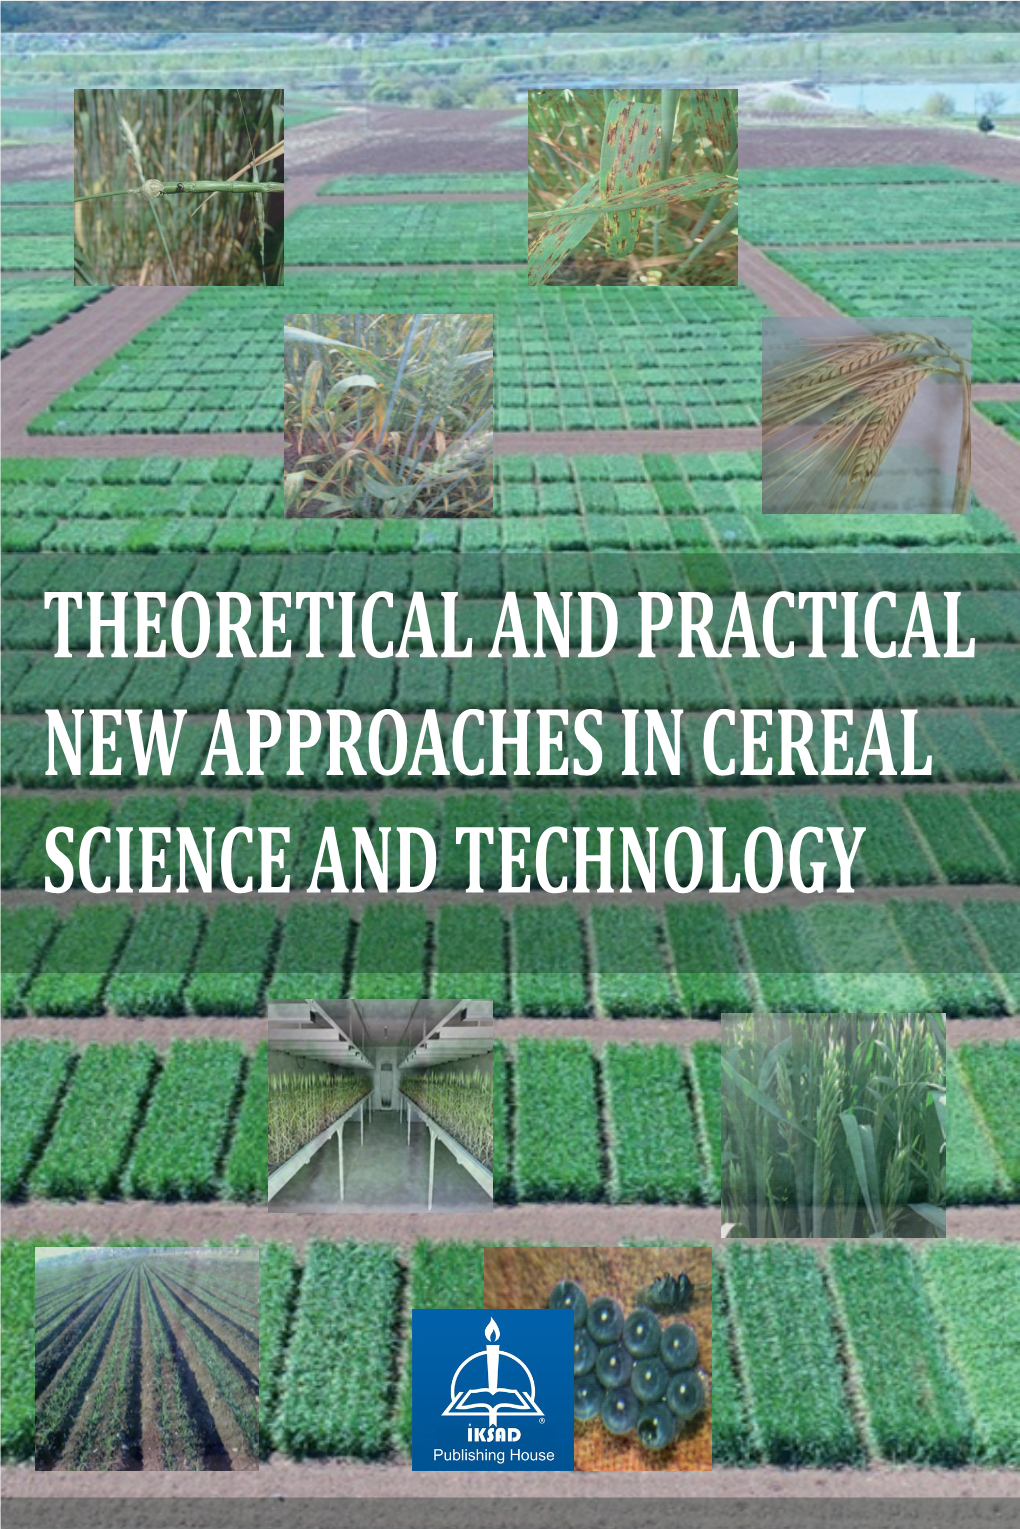 Theoretical and Practical New Approaches in Cereal Science and Technology Theoretical and Practical New Approaches in Cereal Science and Technology